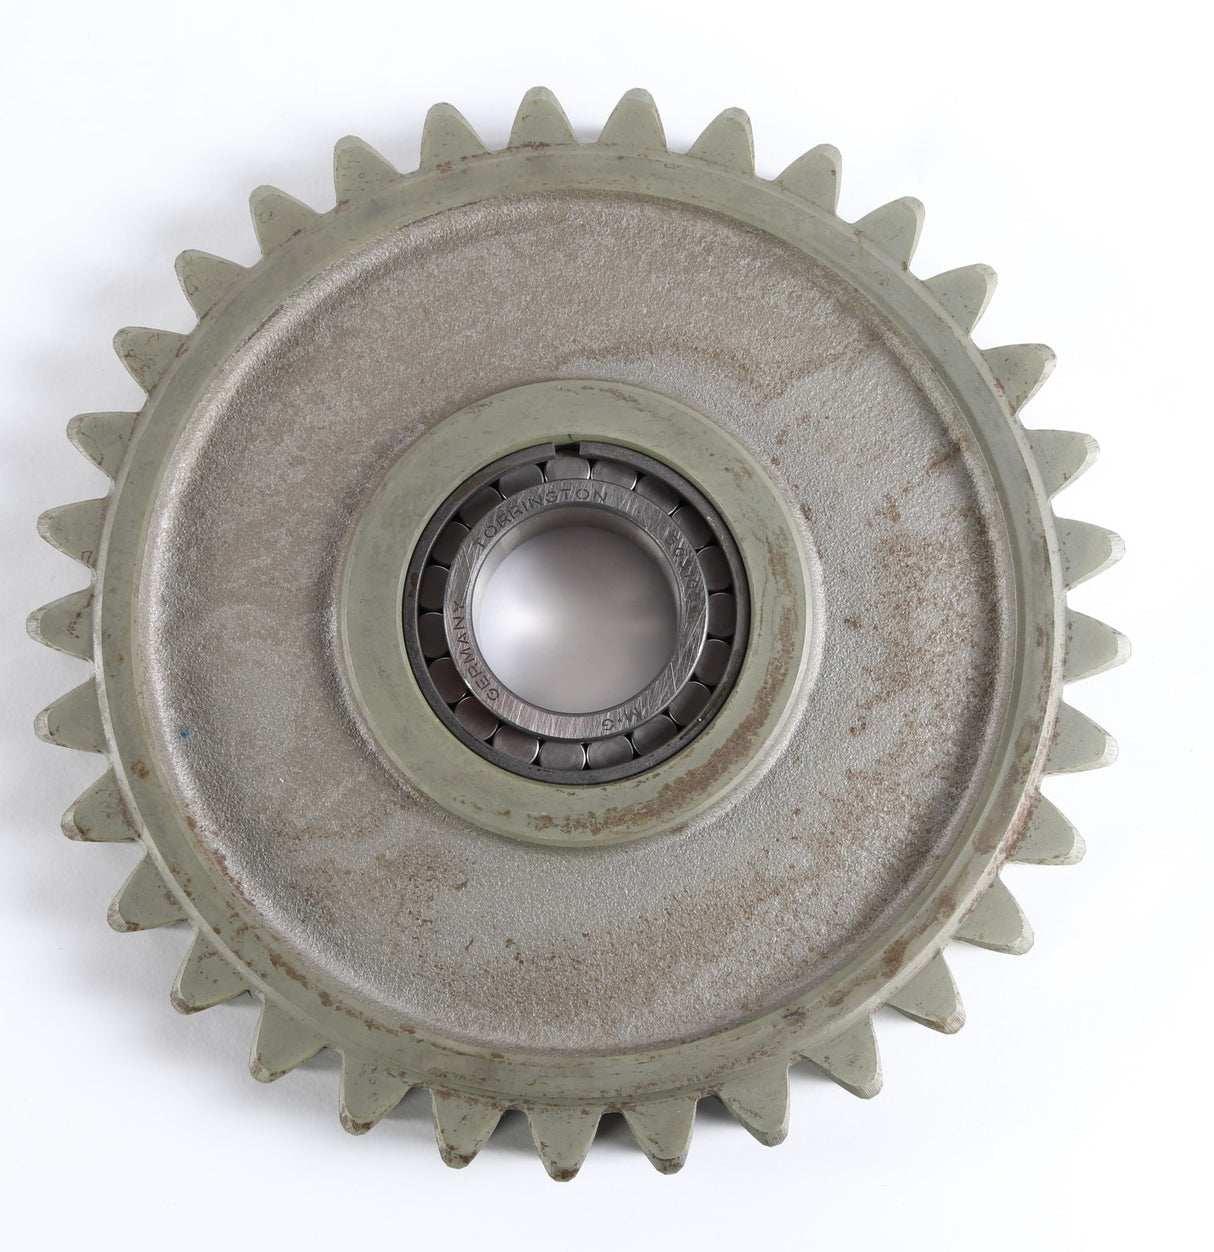 JOHN DEERE CONST & FORESTRY ­-­ AT114959 ­-­ PLANETARY GEAR LINDE HYDR. PART# 8132604500